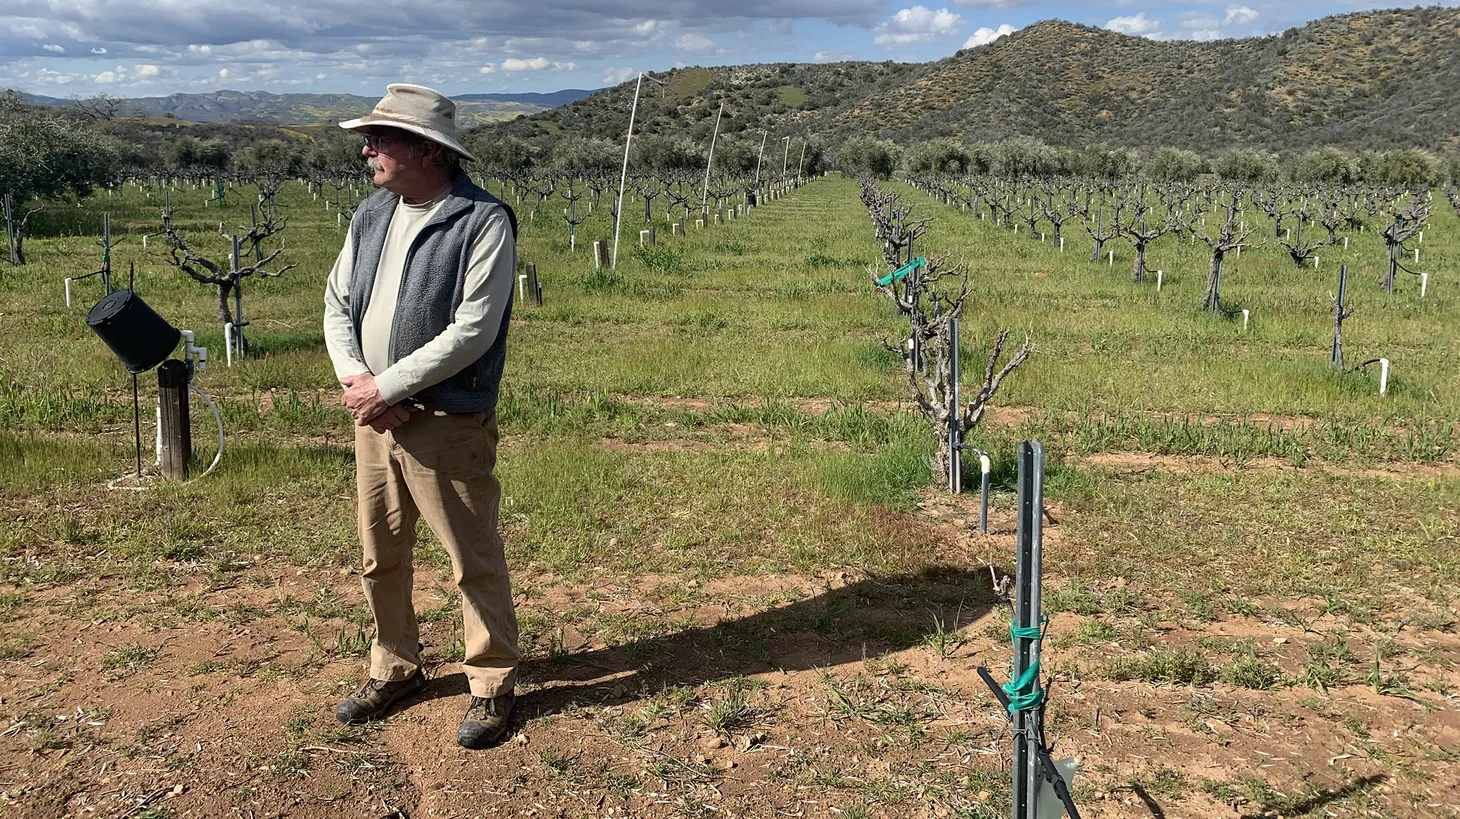 Steve Gliessman farms five acres of grapes at his Condor's Hope vineyard in the Cuyama Basin, where he is fighting two agricultural giants for water.